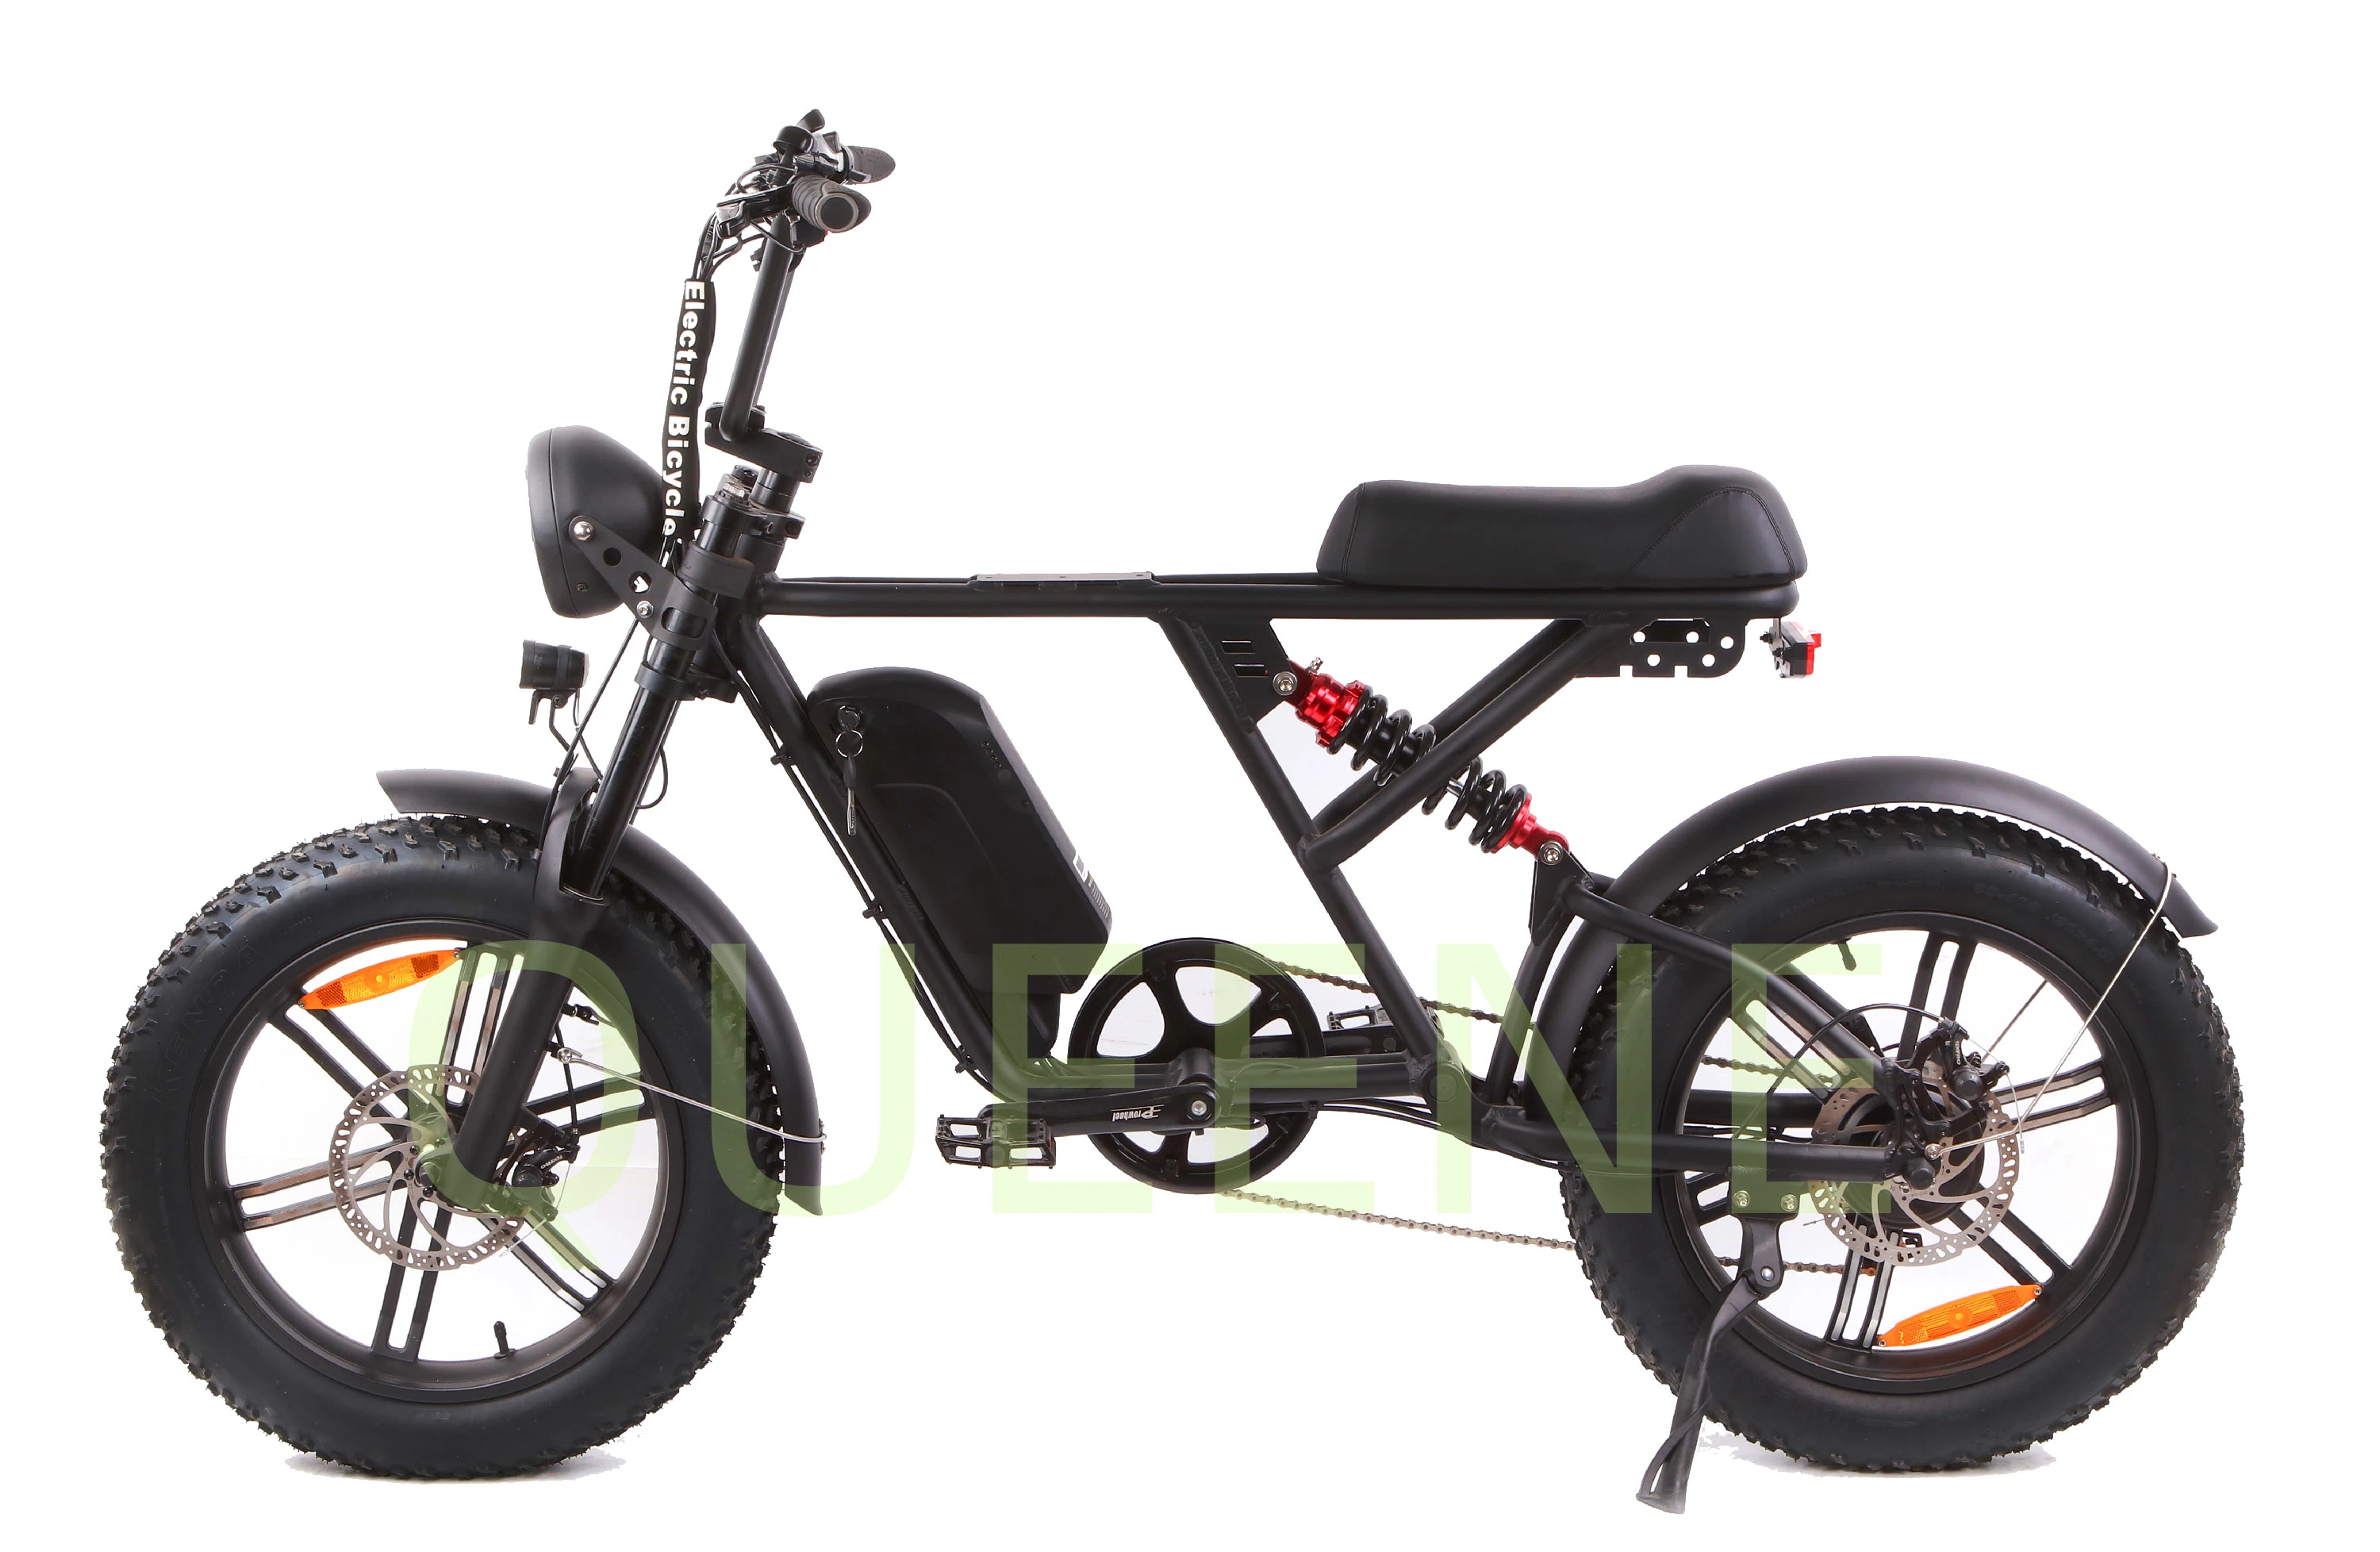 48V 500W 750W 1000W Power China Cheap Full Suspension Retro Vintage Ebike Dirt Mountain Fat Tire Bicycle Electric Bike